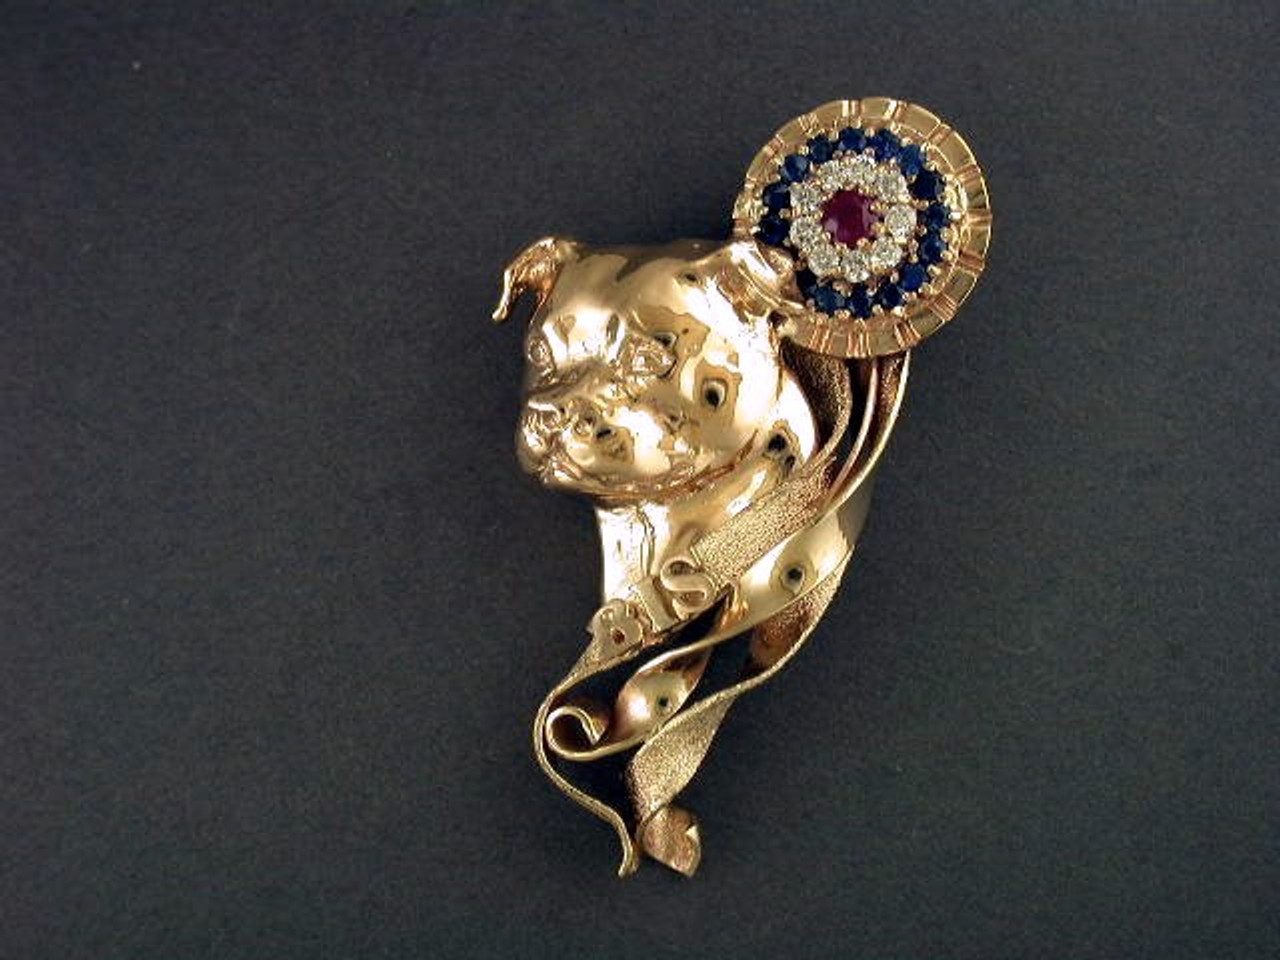 Rosette With Stafforshire Terrier Pendant